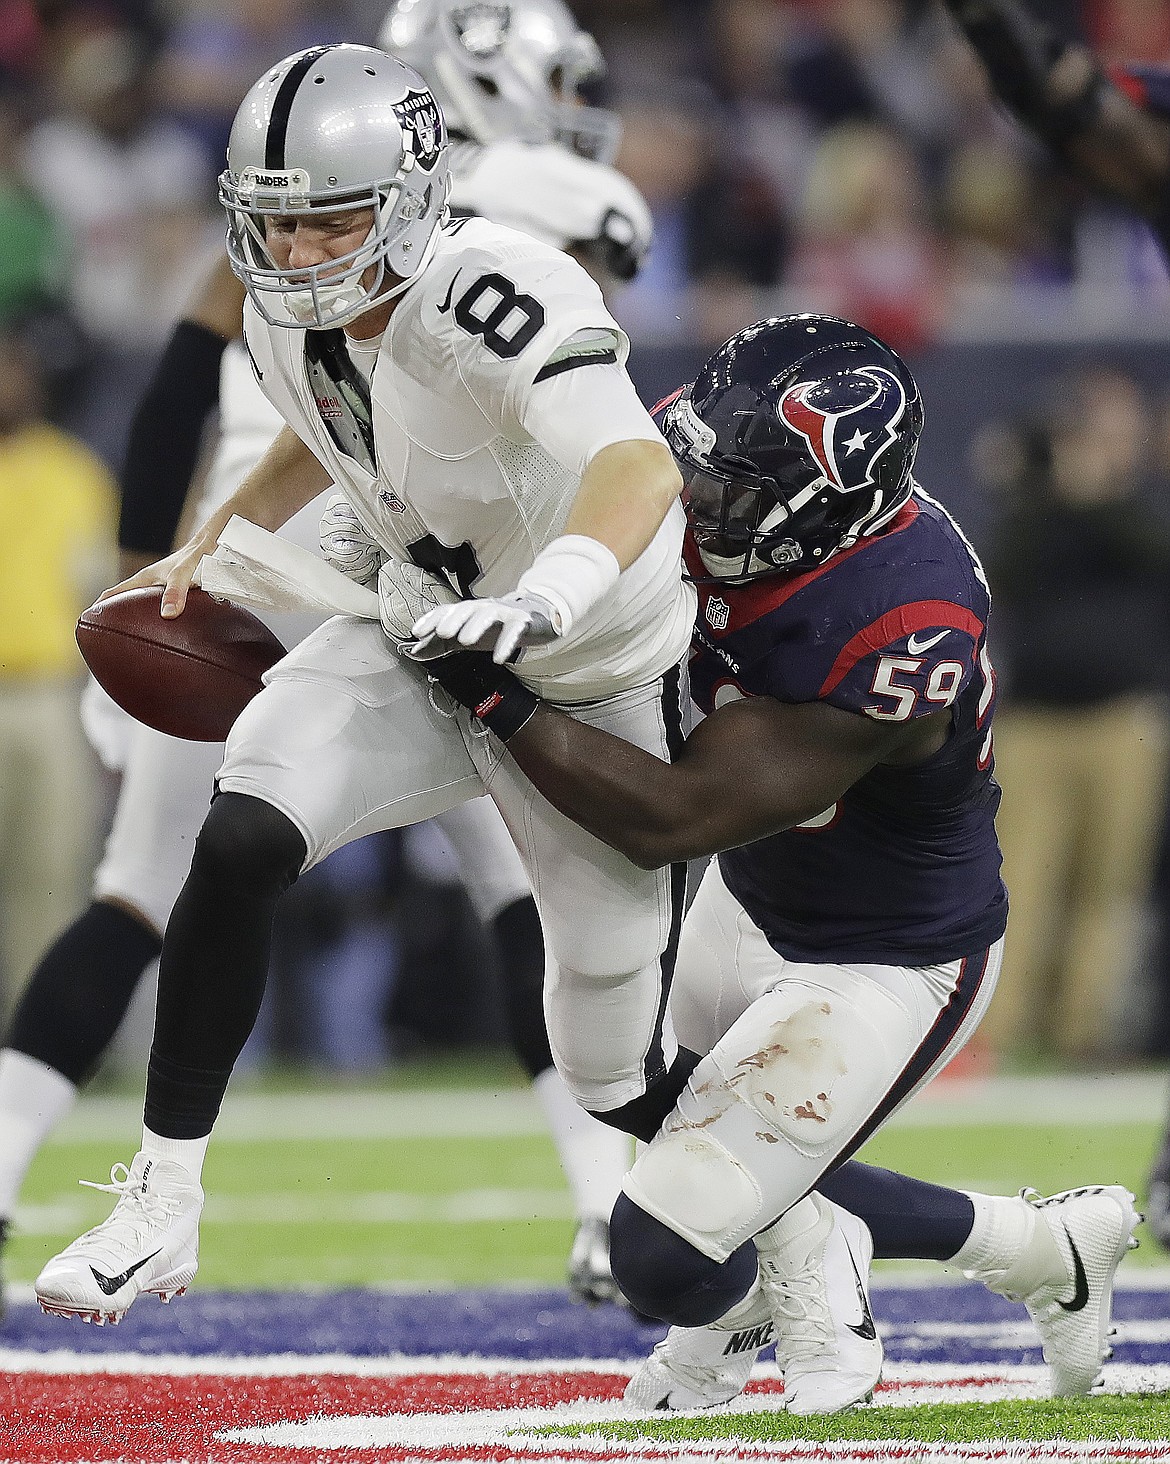 Houston Texans outside linebacker Whitney Mercilus (59) sacks Oakland Raiders quarterback Connor Cook (8) during the second half of an AFC Wild Card NFL football game Saturday, Jan. 7, 2017, in Houston. (AP Photo/Eric Gay)